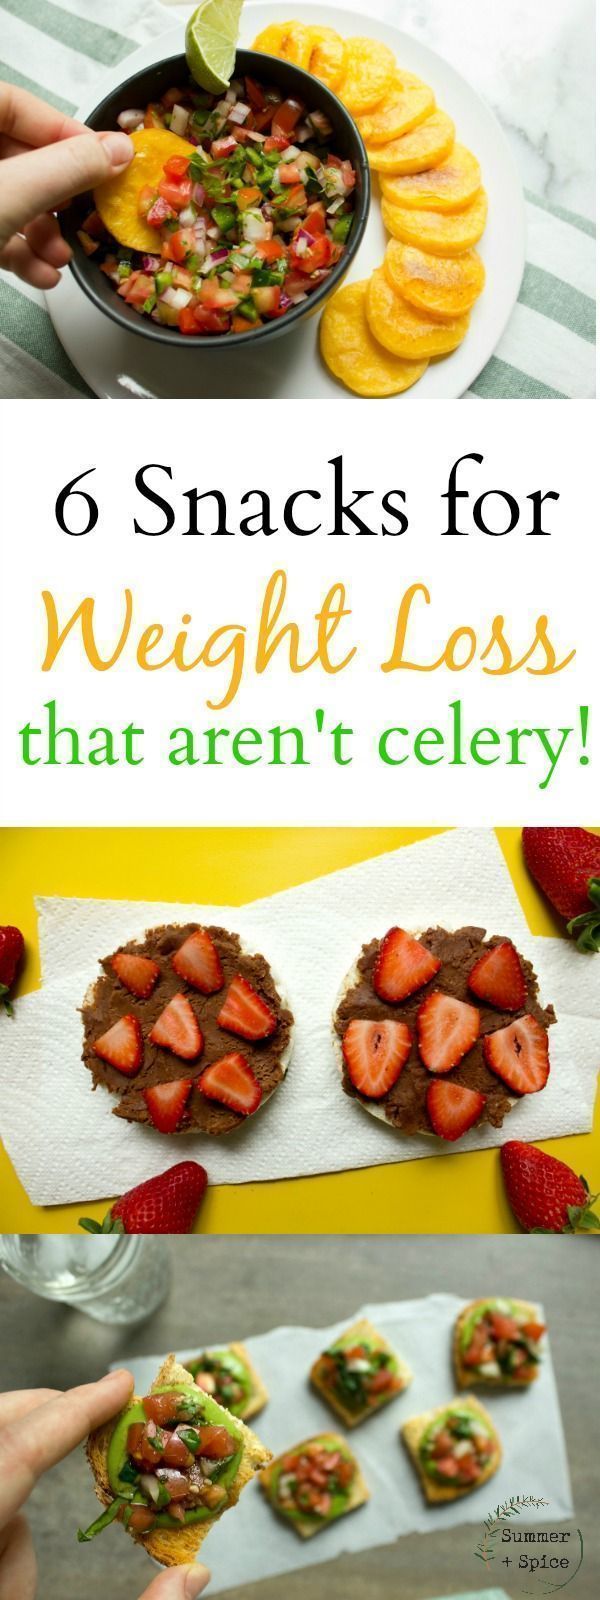 Healthy Snacks for Weight Loss -   14 healthy recipes weight loss cooking ideas